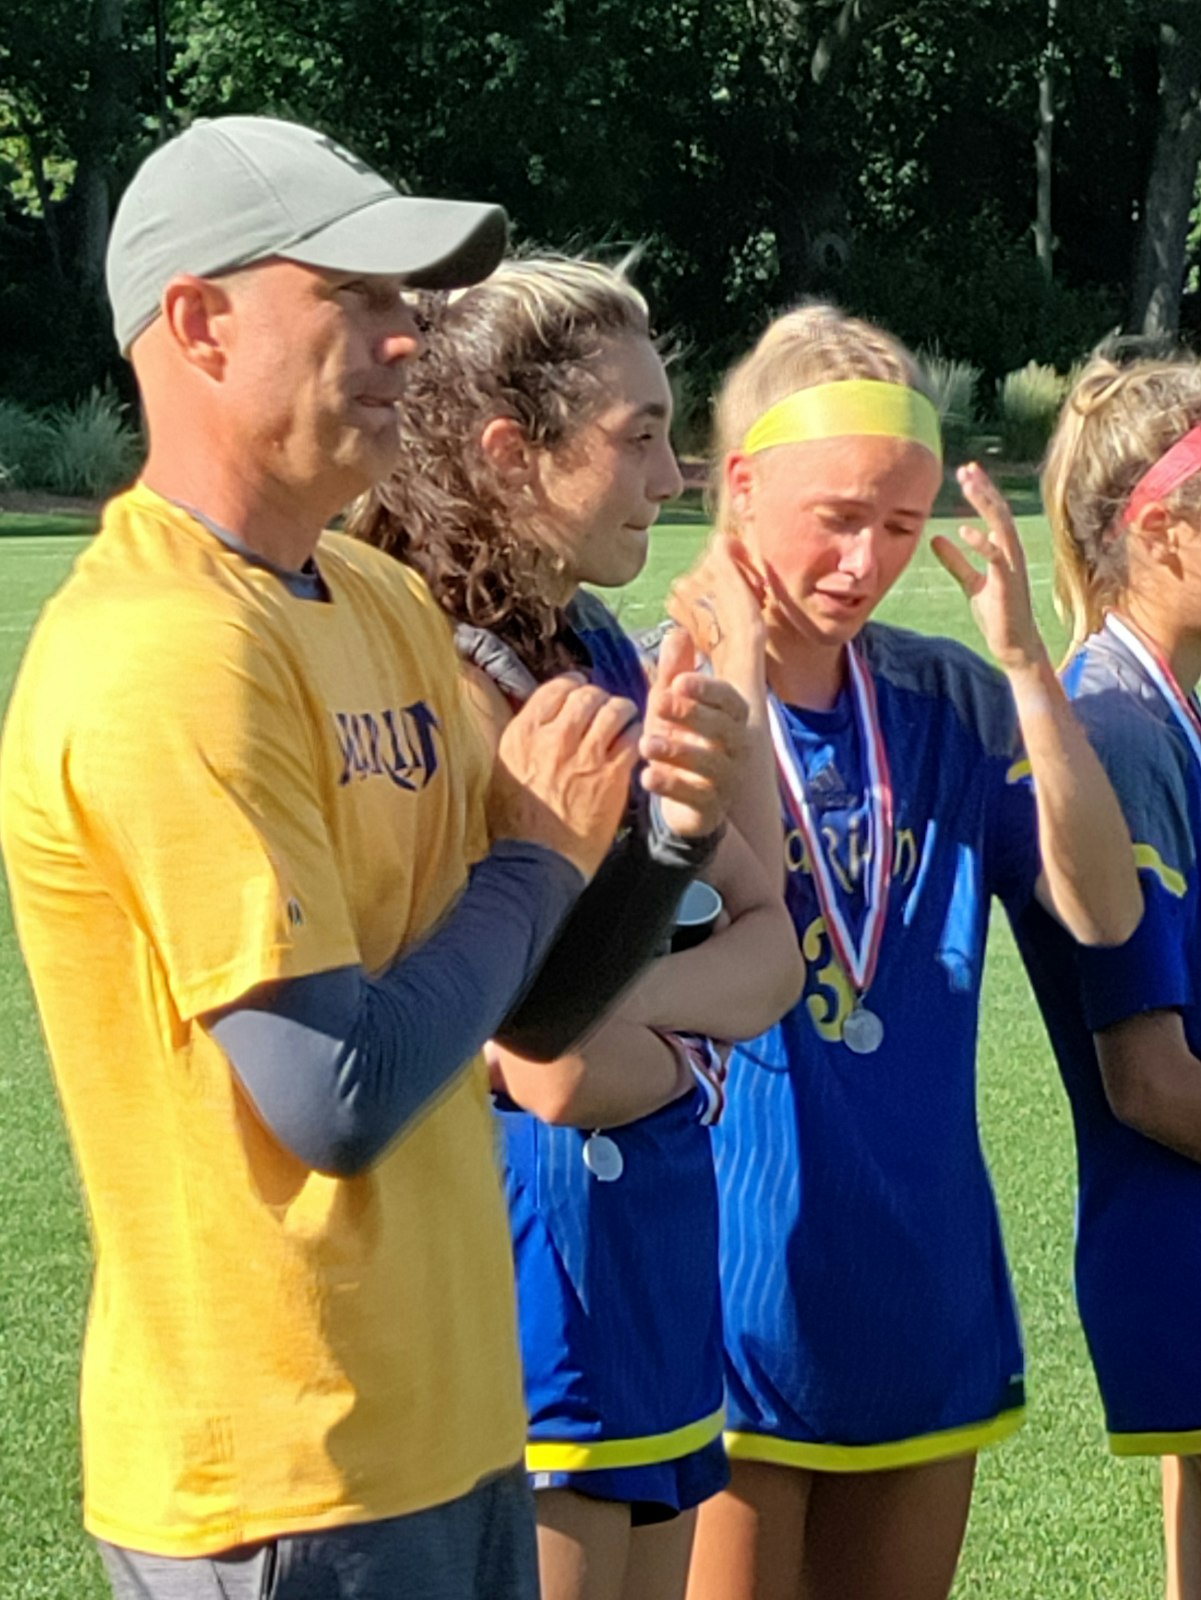 Birmingham Marian coach Reid Friedrichs, Angelina Briggs and Lucy Kinna share an emotional moment in the awards line after the Mustangs’ 2-1 loss to Grand Rapids Forest Hills Central. (Don Horkey | Special to Detroit Catholic)